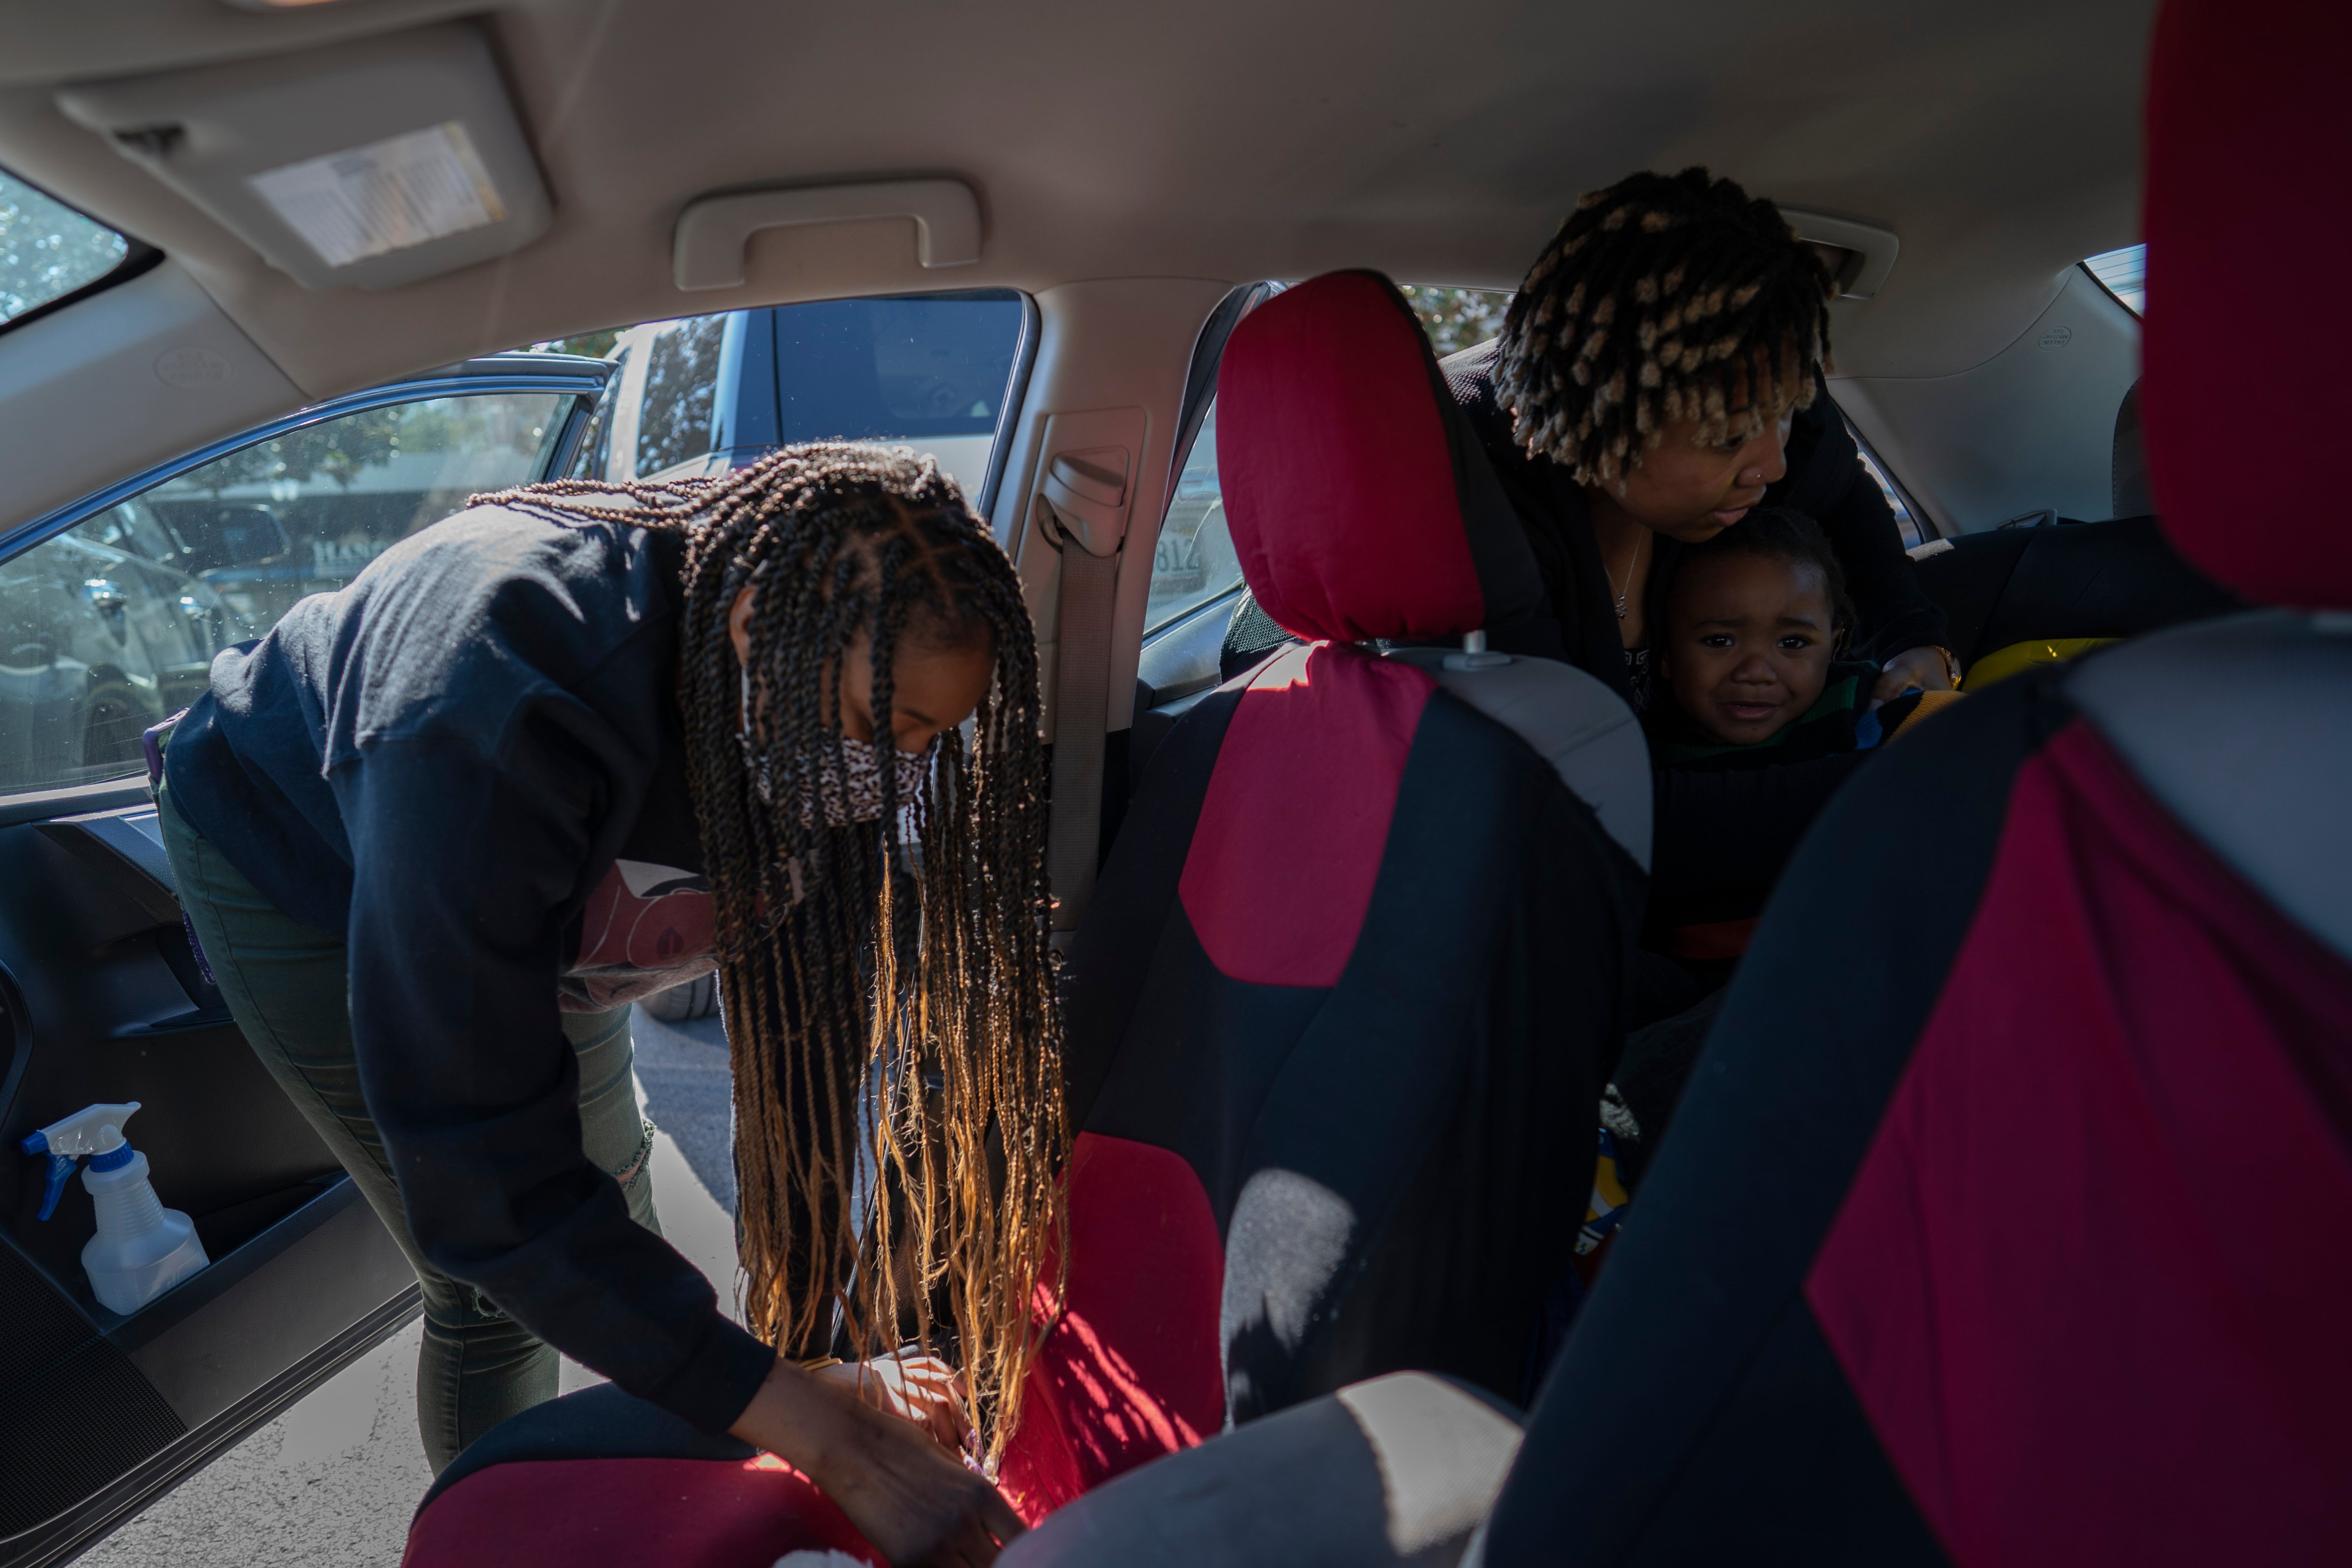 Angelica Lyons secures her 2-year old son Malik into his child car seat while her sister, Ansonia Lyons, prepares to ride with her after their breakfast outing to celebrate their father's birthday, (Wong Maye-E—AP Photo)